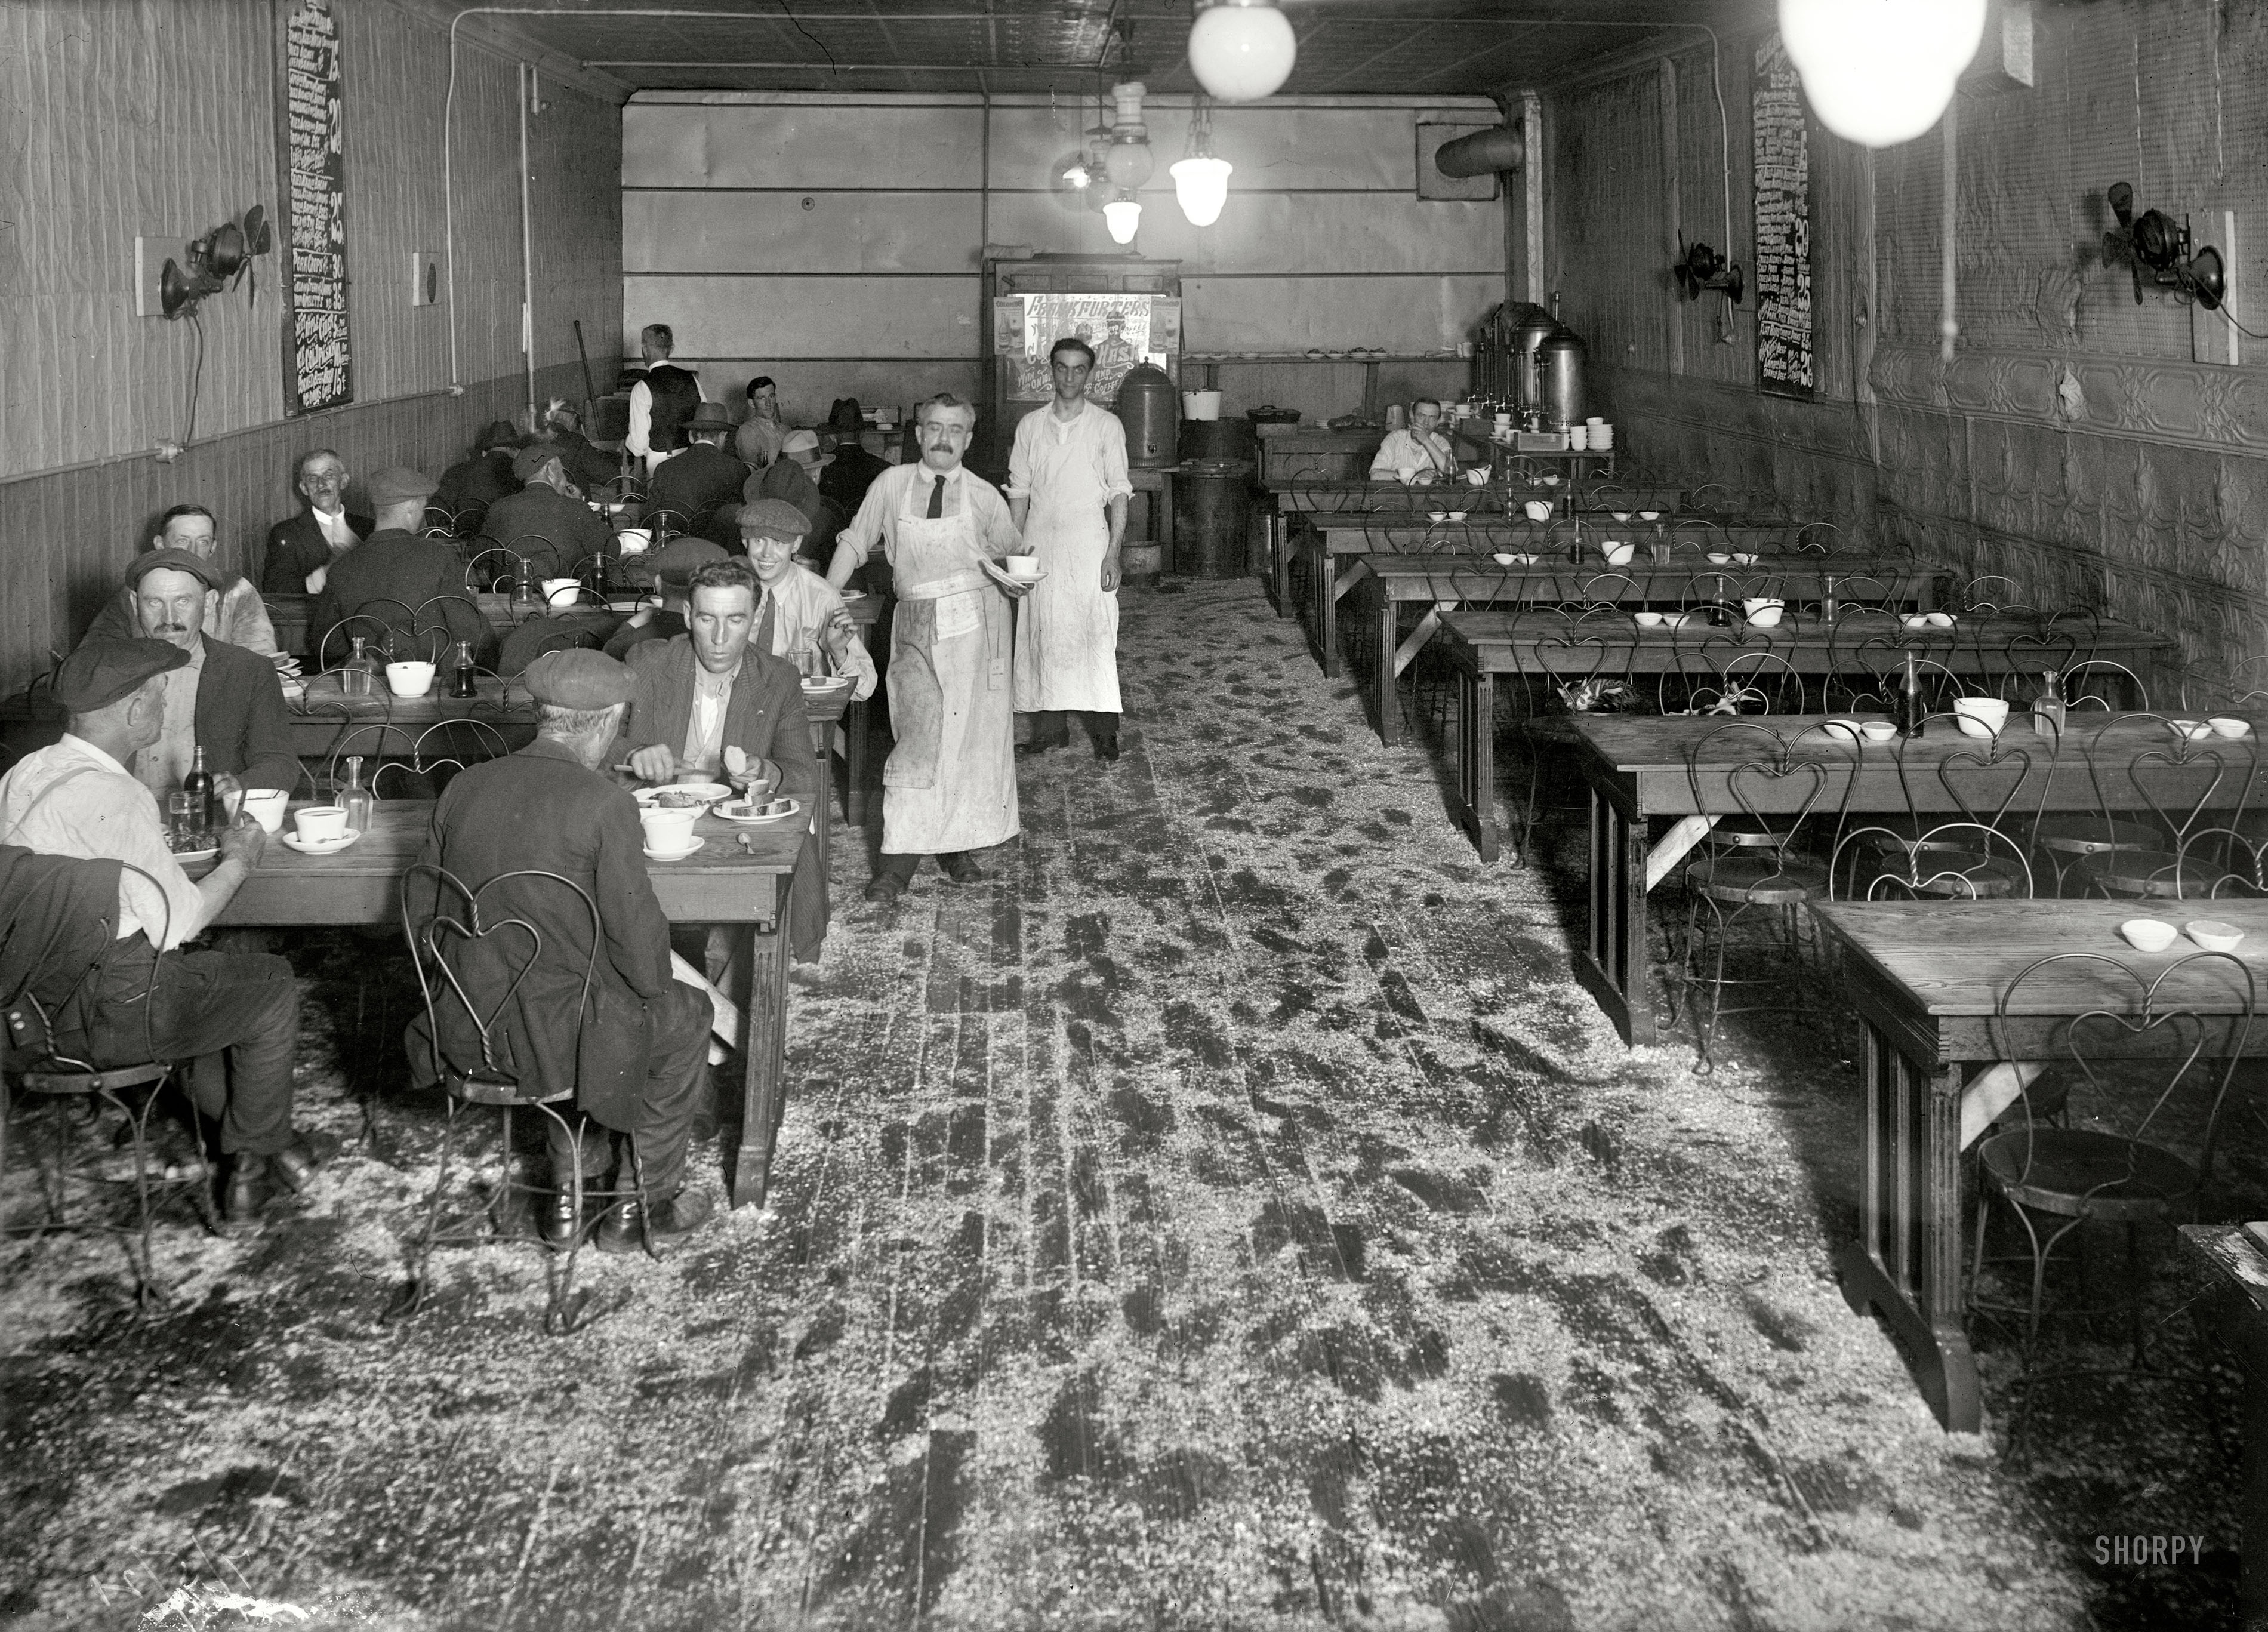 New York, July 5, 1921. "Lanier Hotel restaurant." Fried kidney only 20 cents. Note sleeping mousers. 5x7 glass negative, Bain News Service. View full size.